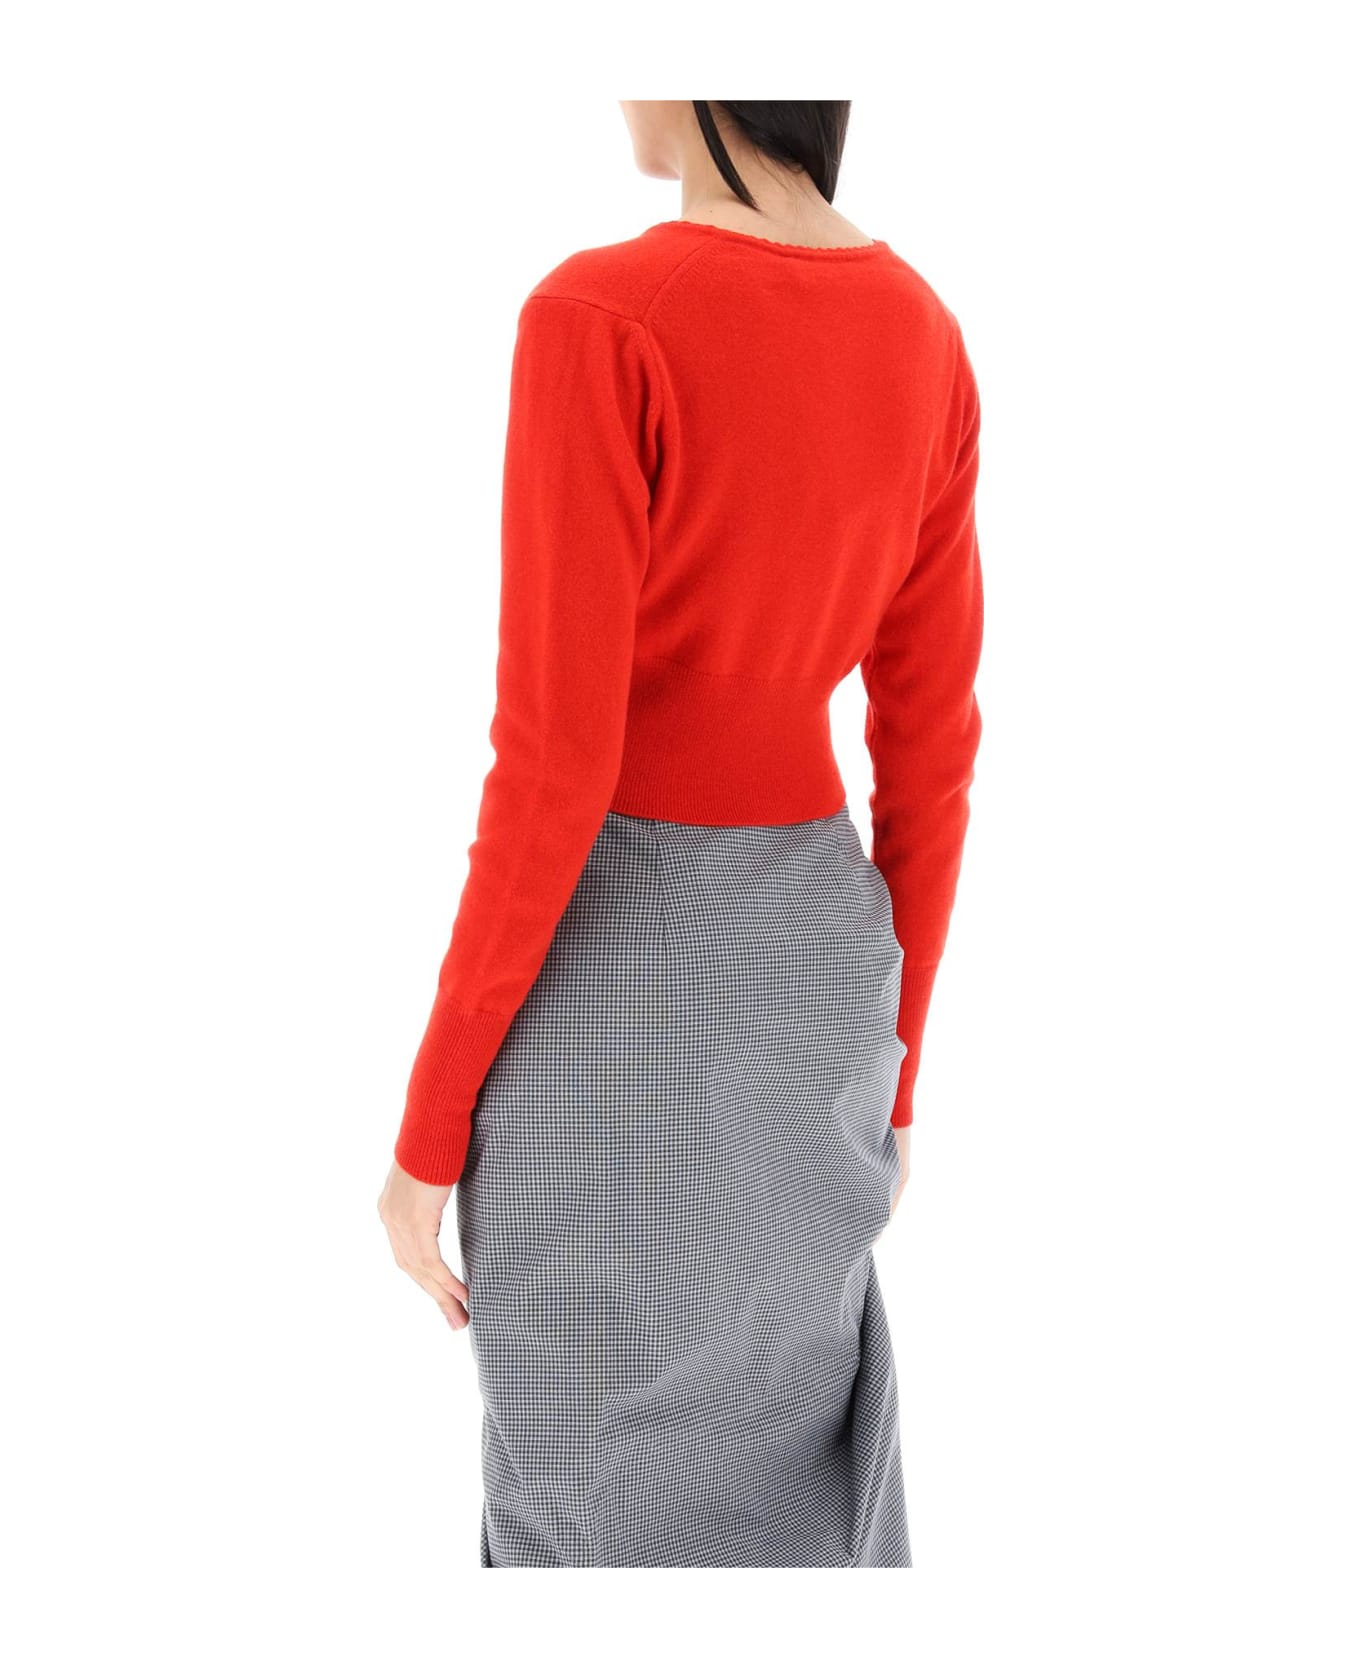 Vivienne Westwood Bea Cropped Cardigan - RED (Red) カーディガン